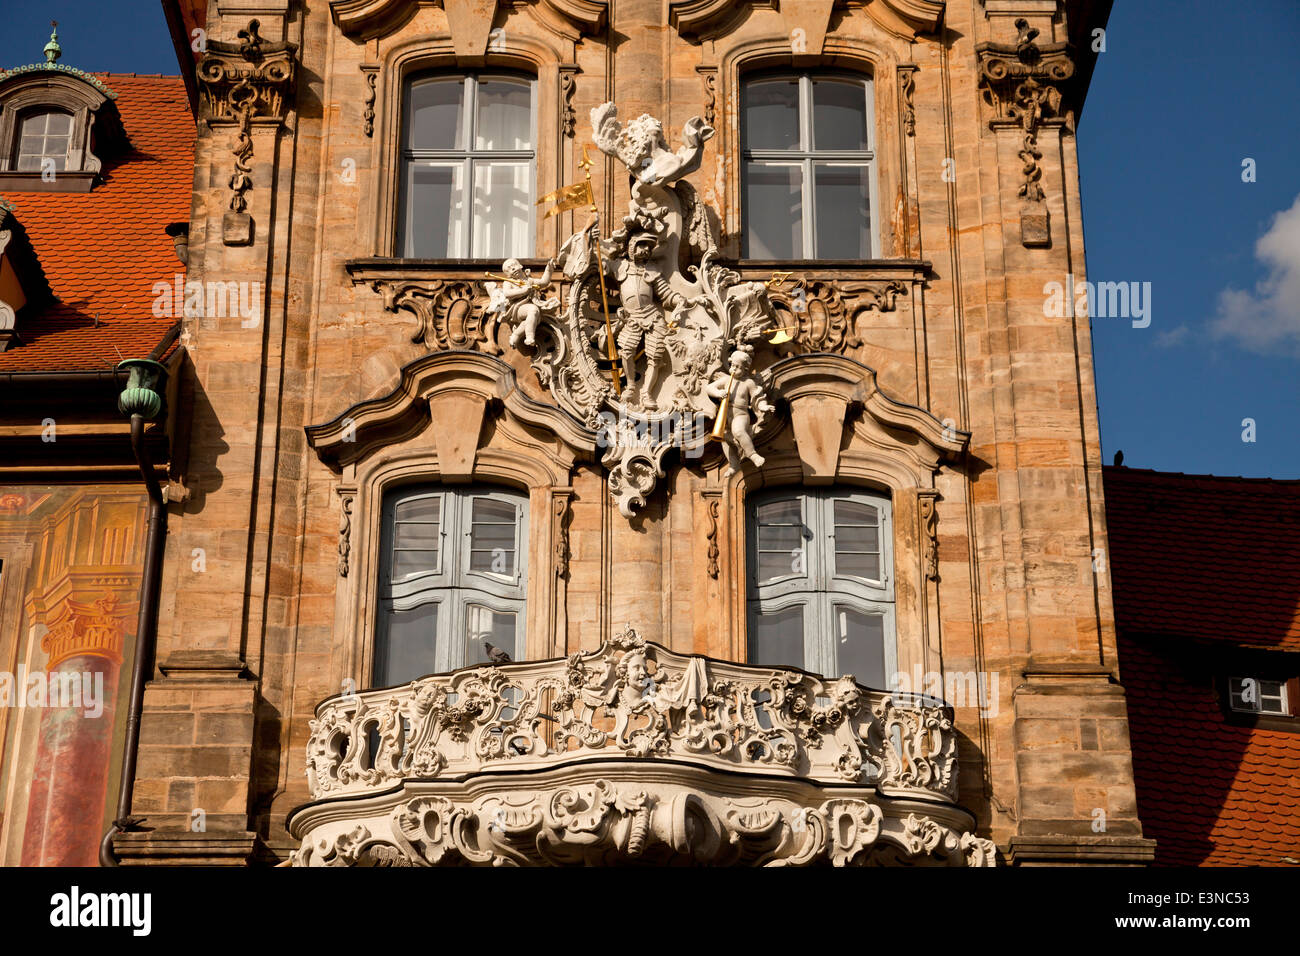 Detail of the Old Town Hall 'Alte Rathaus' in the historic city center in Bamberg, Upper Franconia, Bavaria, Germany, Europe Stock Photo